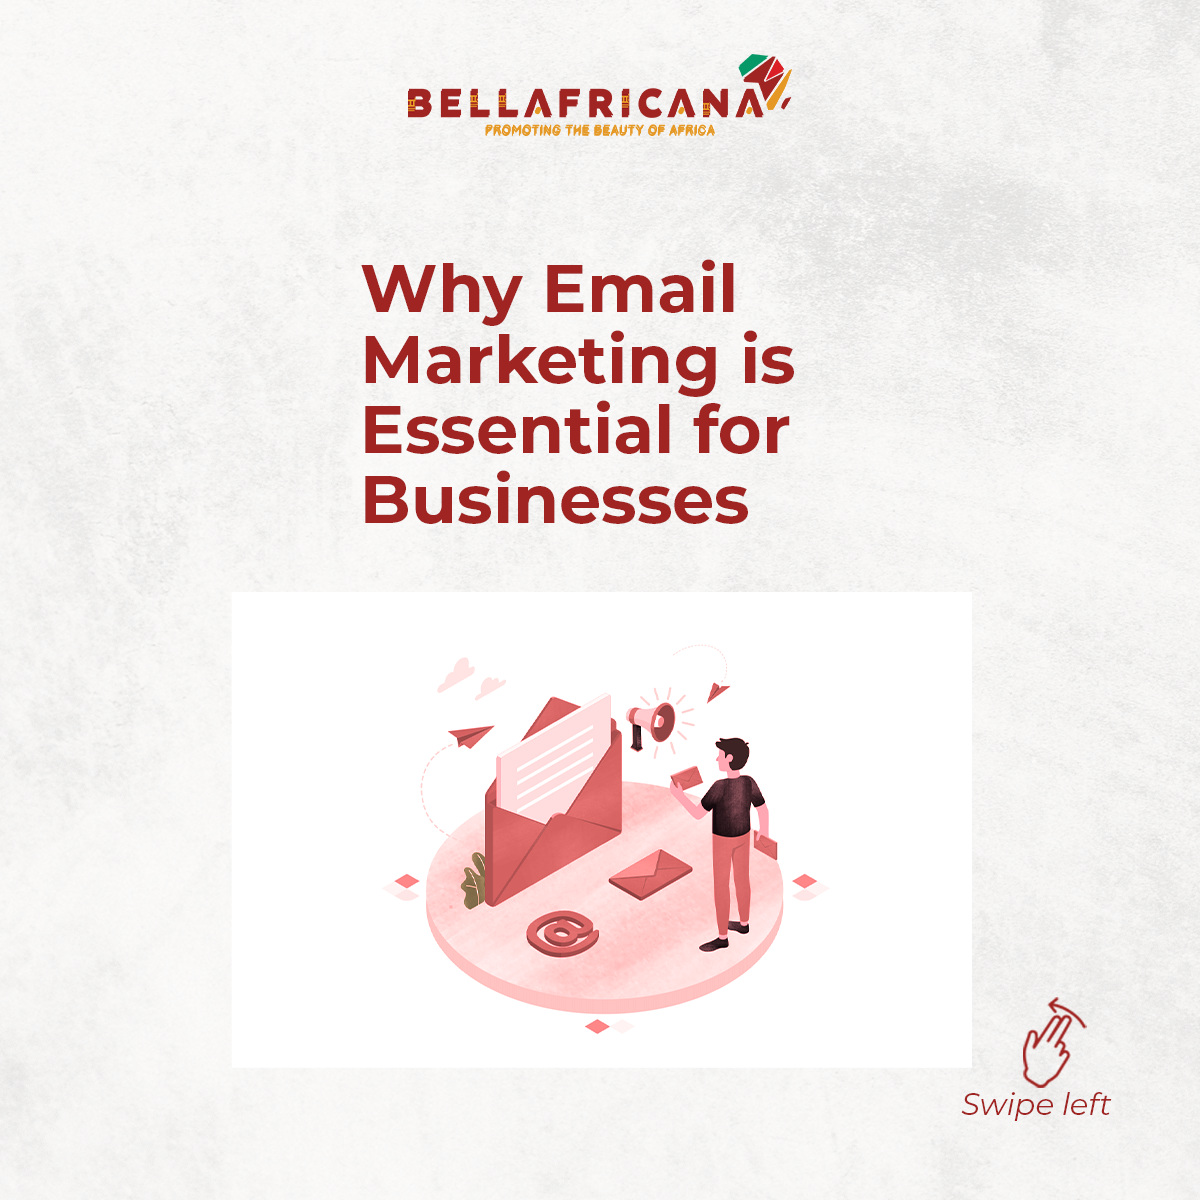 Why email marketing is essential